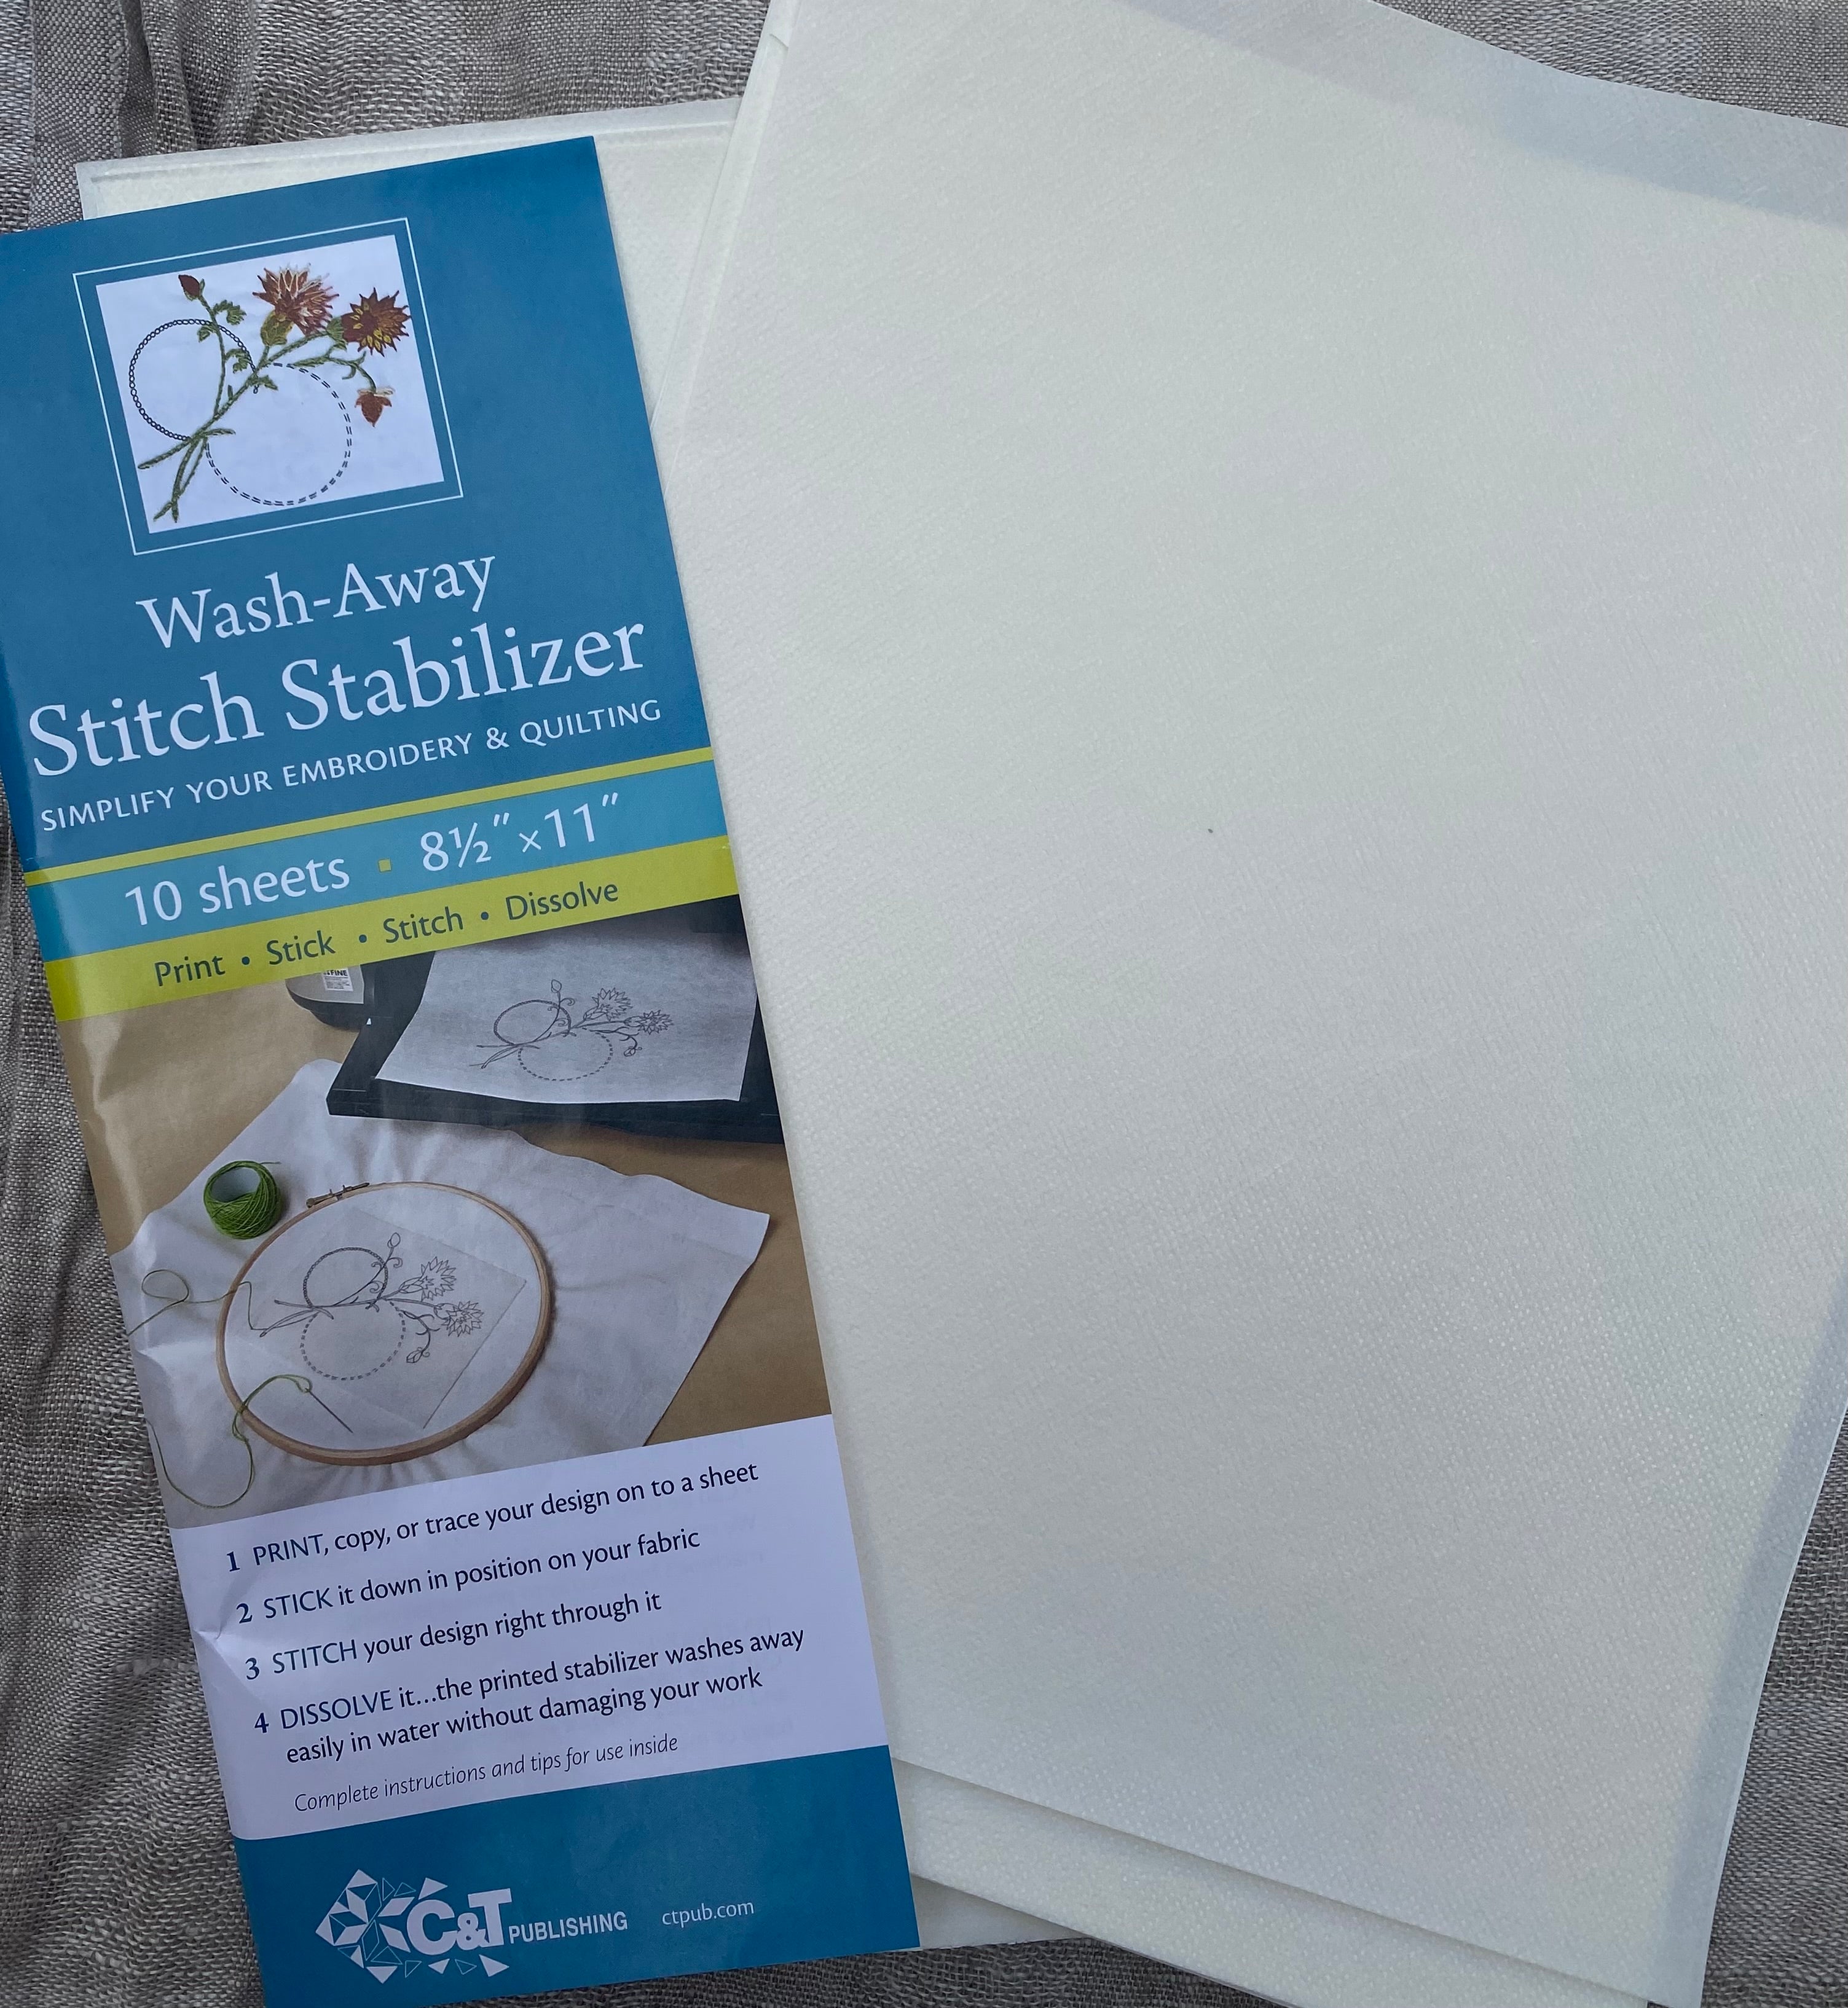 Wash Away Stitch Stabilizer: Simplify Your Embroidery & Quilting